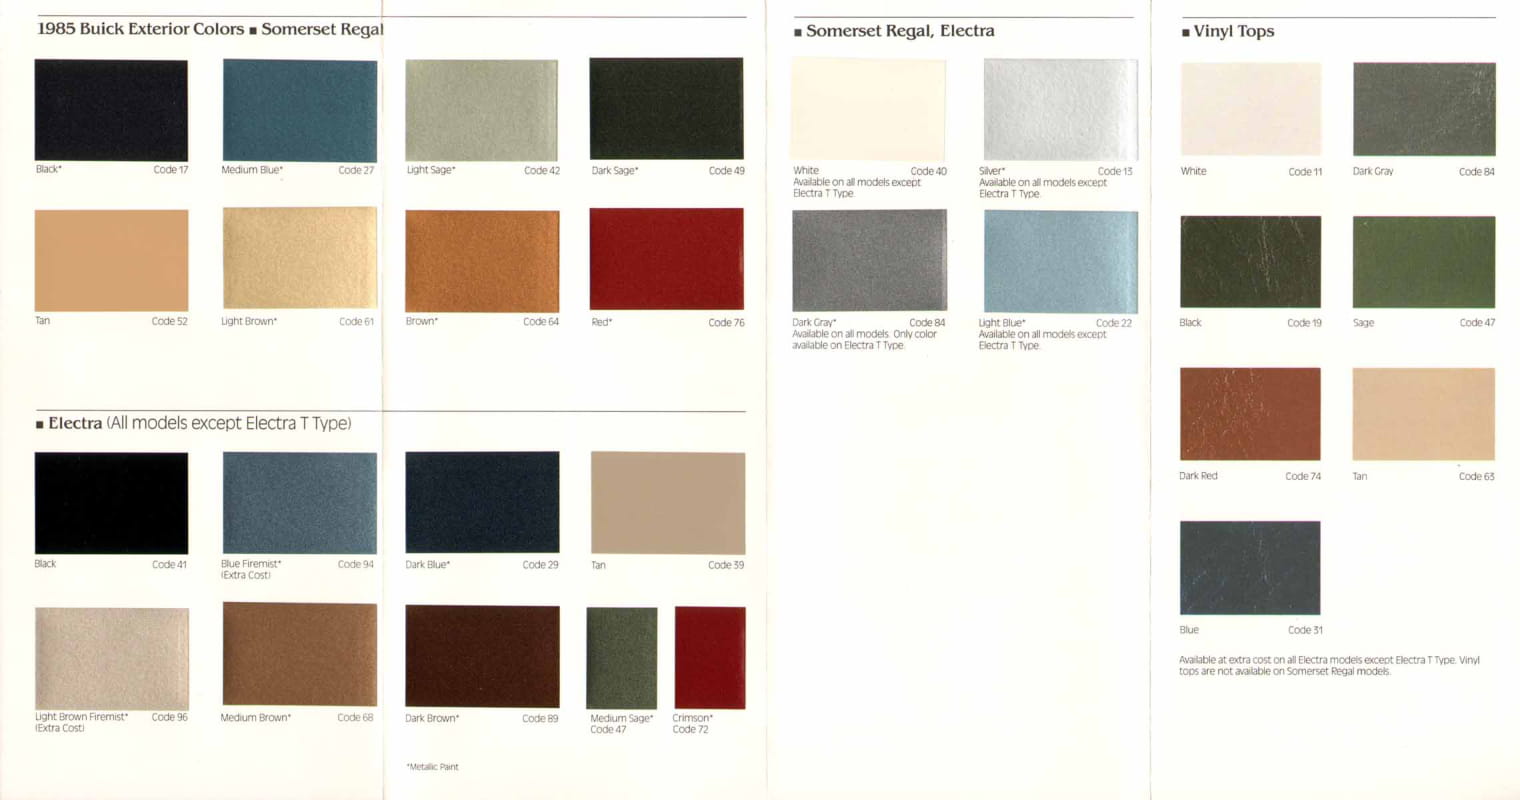 General Motors oem paint swatches, color codes and color names for 1985 vehicles.